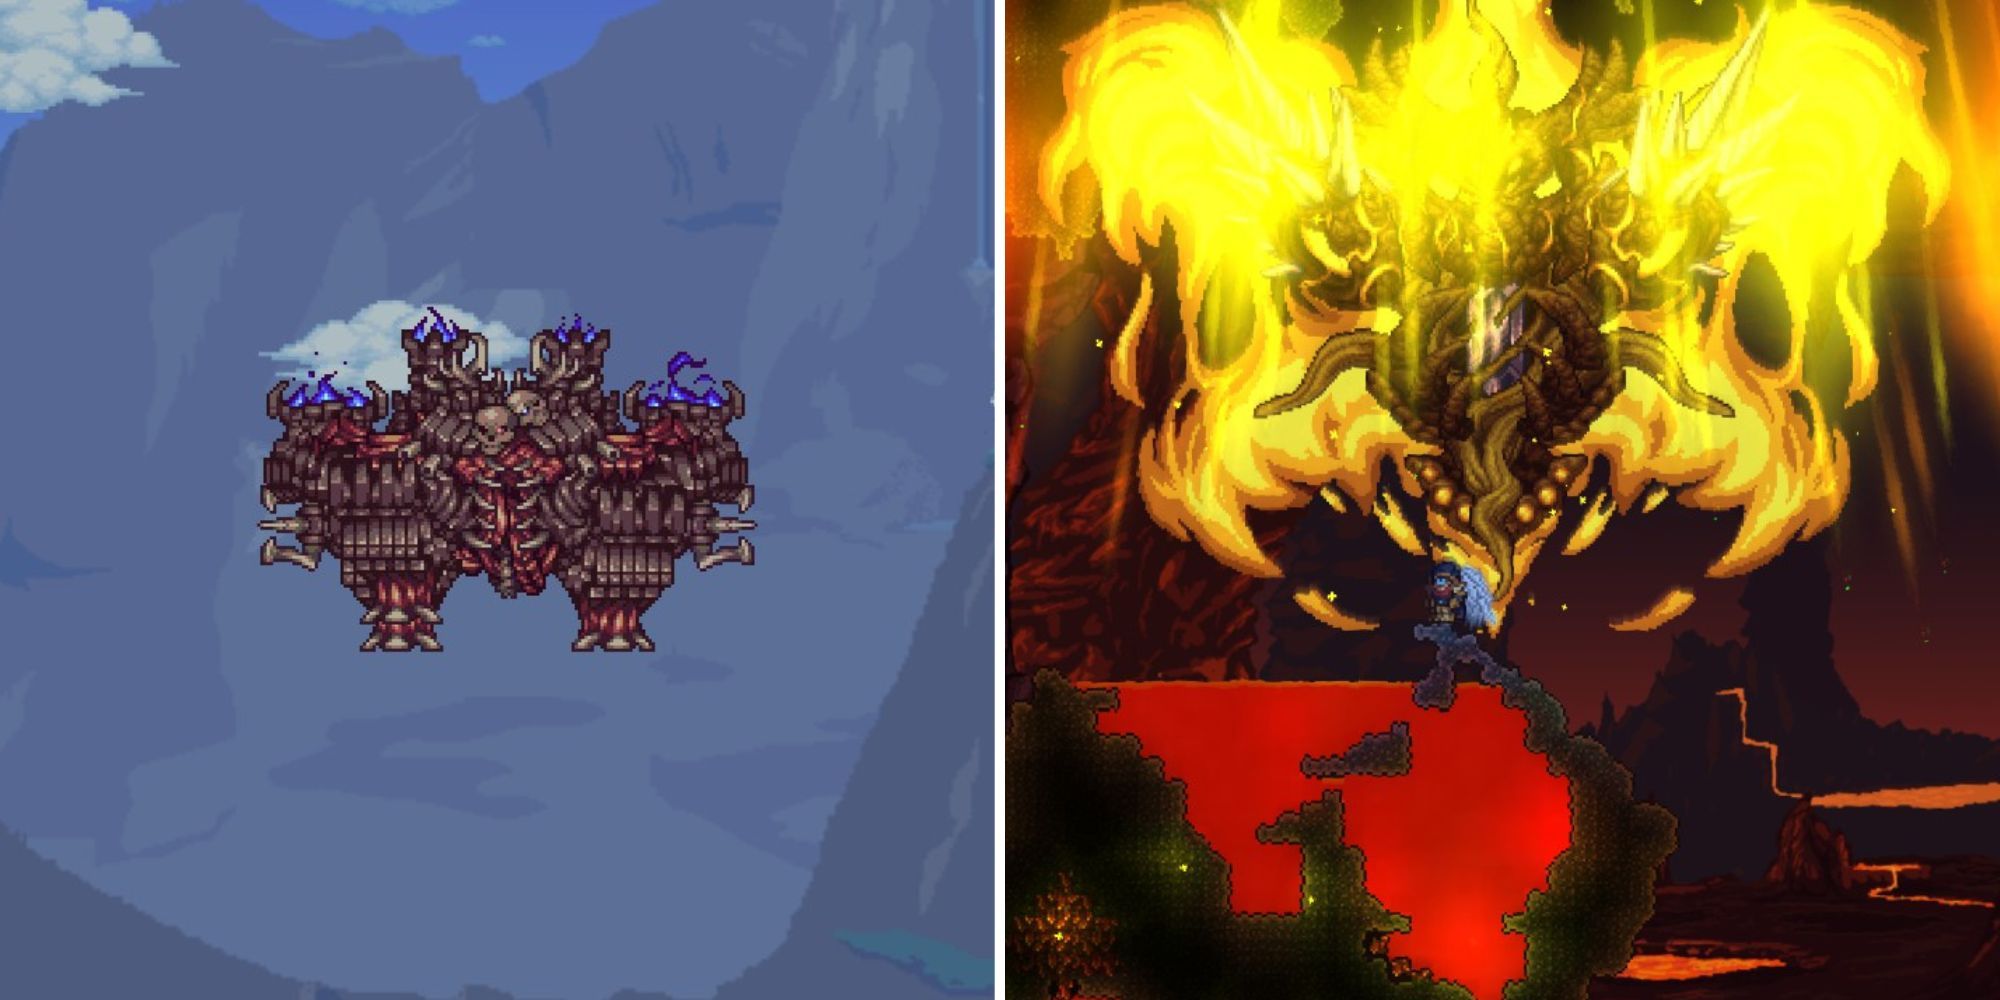 A split image of a floating, red and dull white boss with sinister accents, and a underworld boss with glowing, flaming wings.